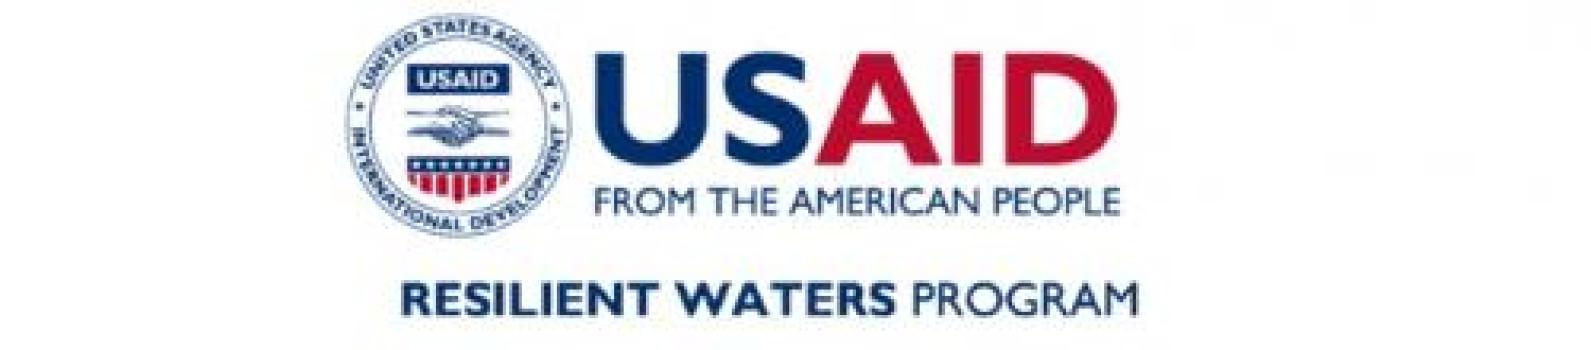 Resilient Waters Program